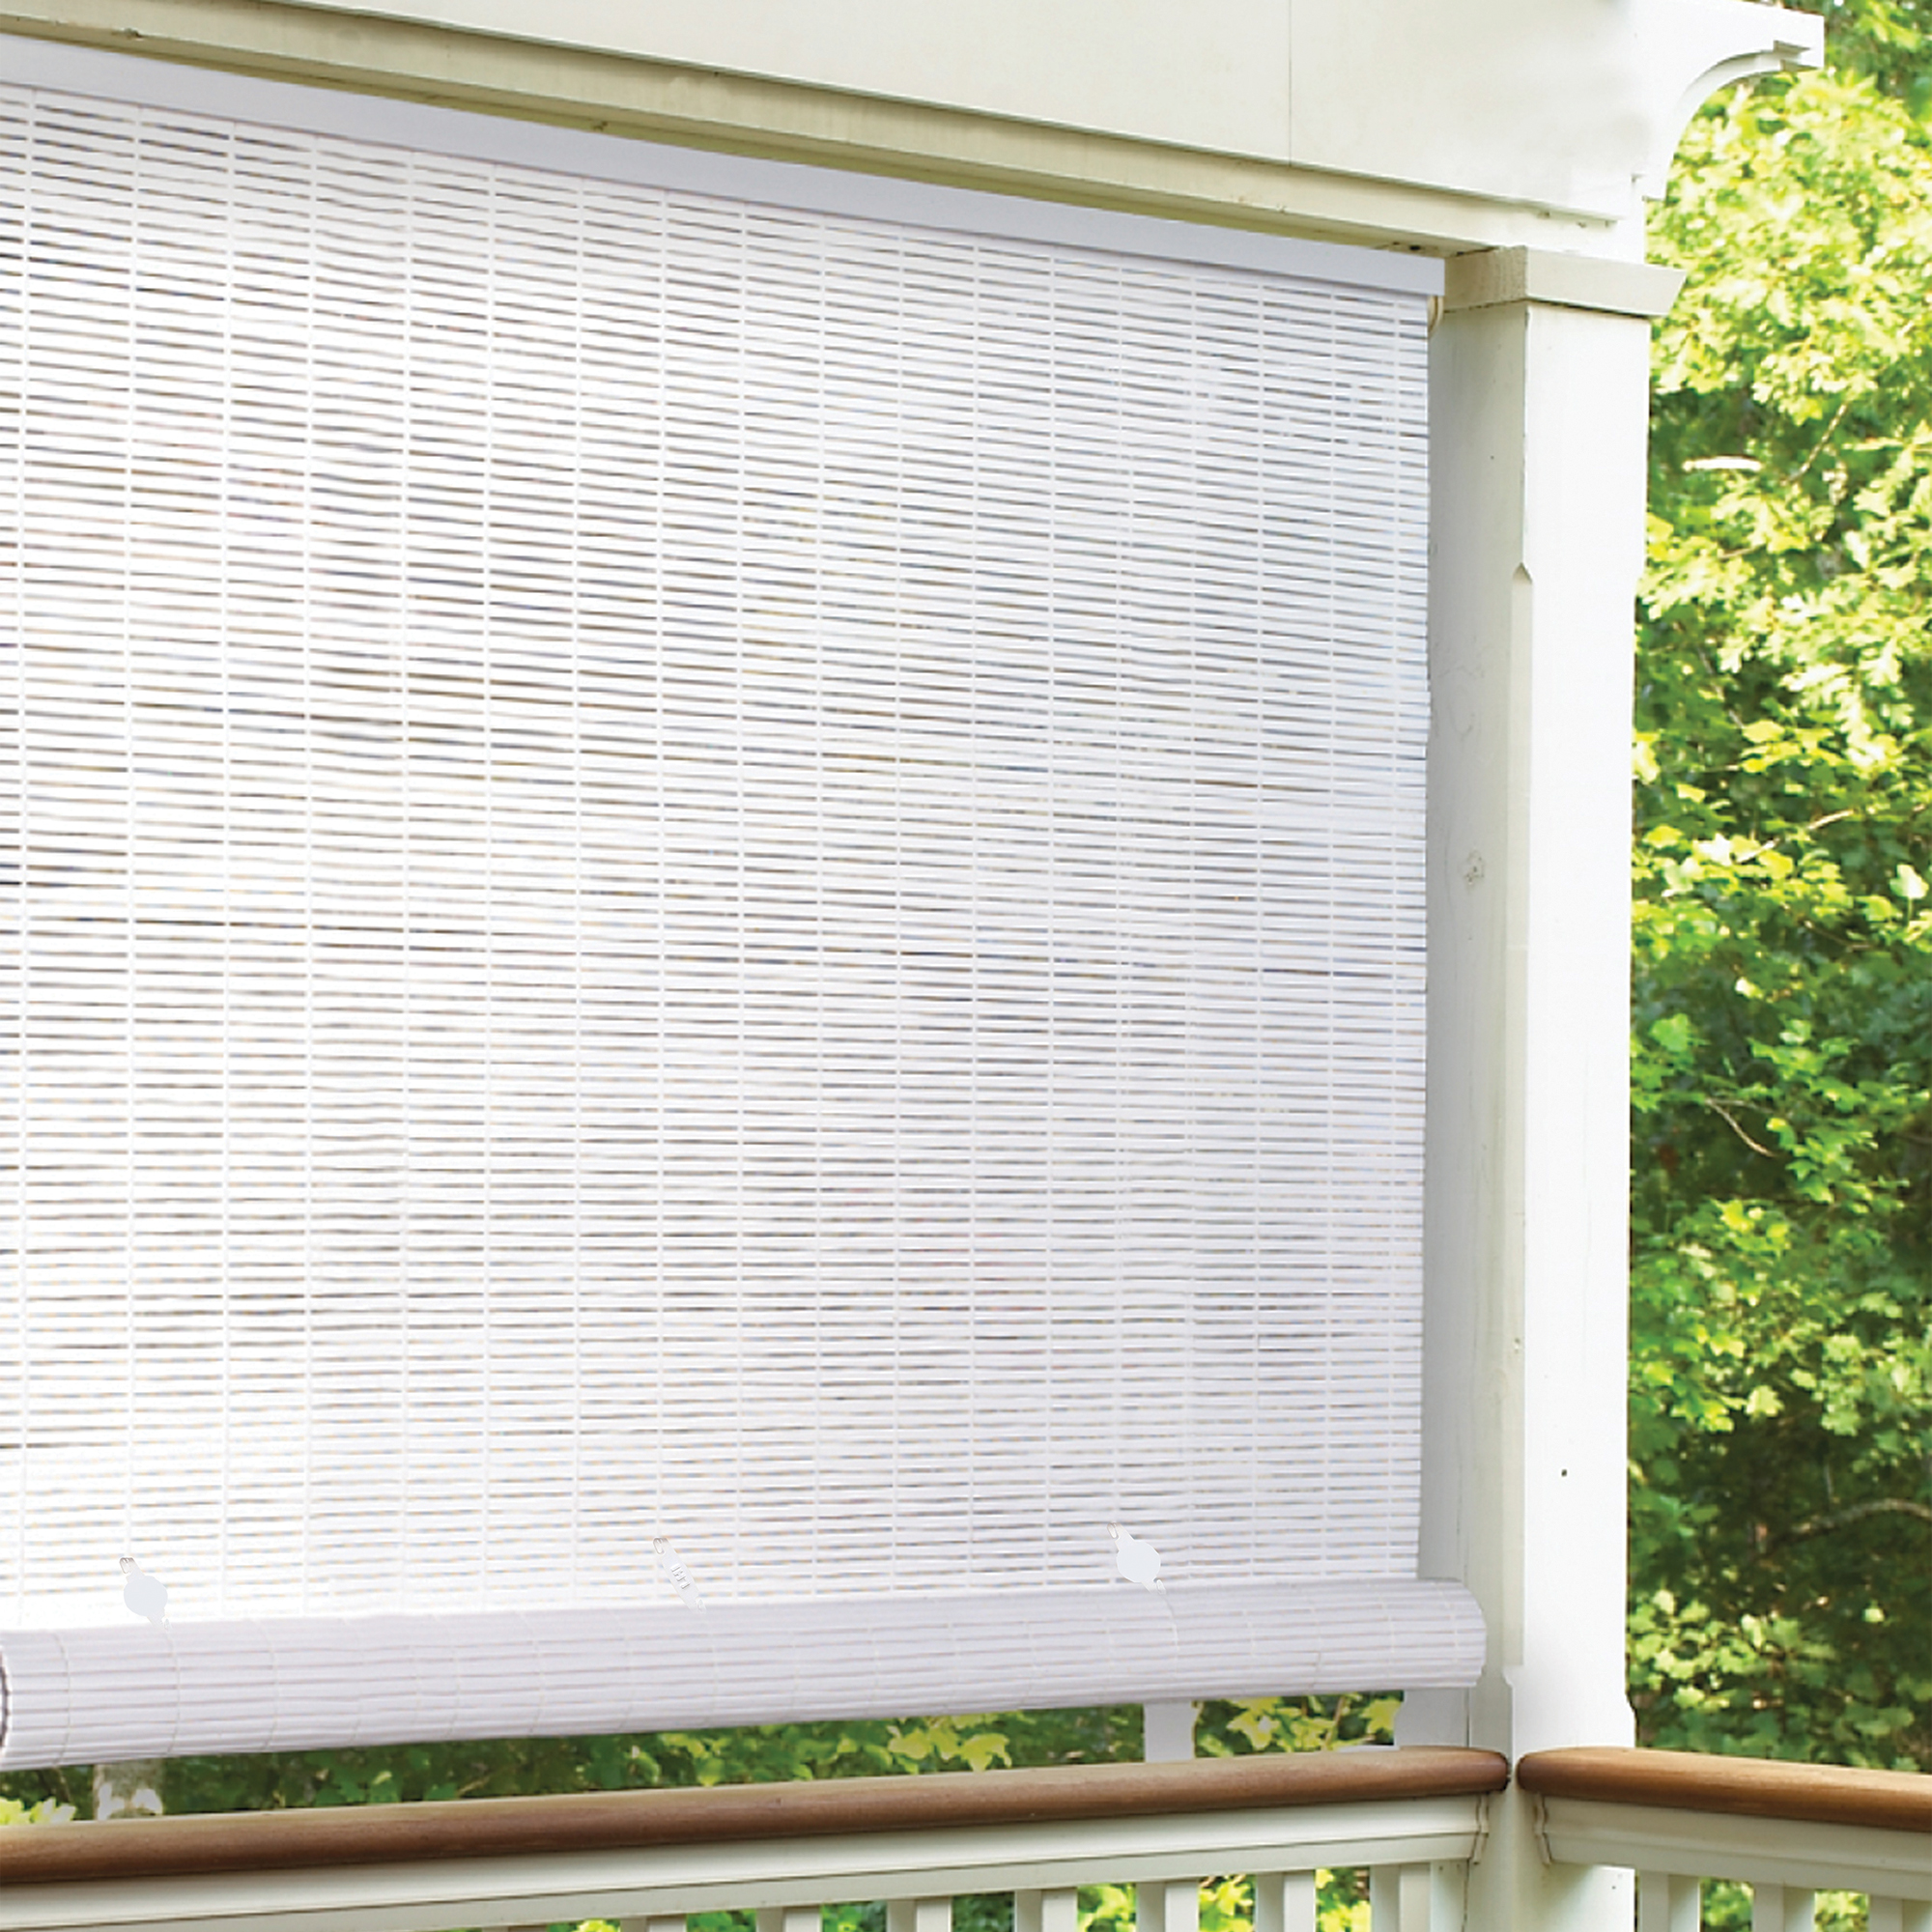 Radiance Cordless 1/4" PVC Roll-up White Outdoor Sun Shade, 3'x6', Multiple Sizes - image 2 of 5